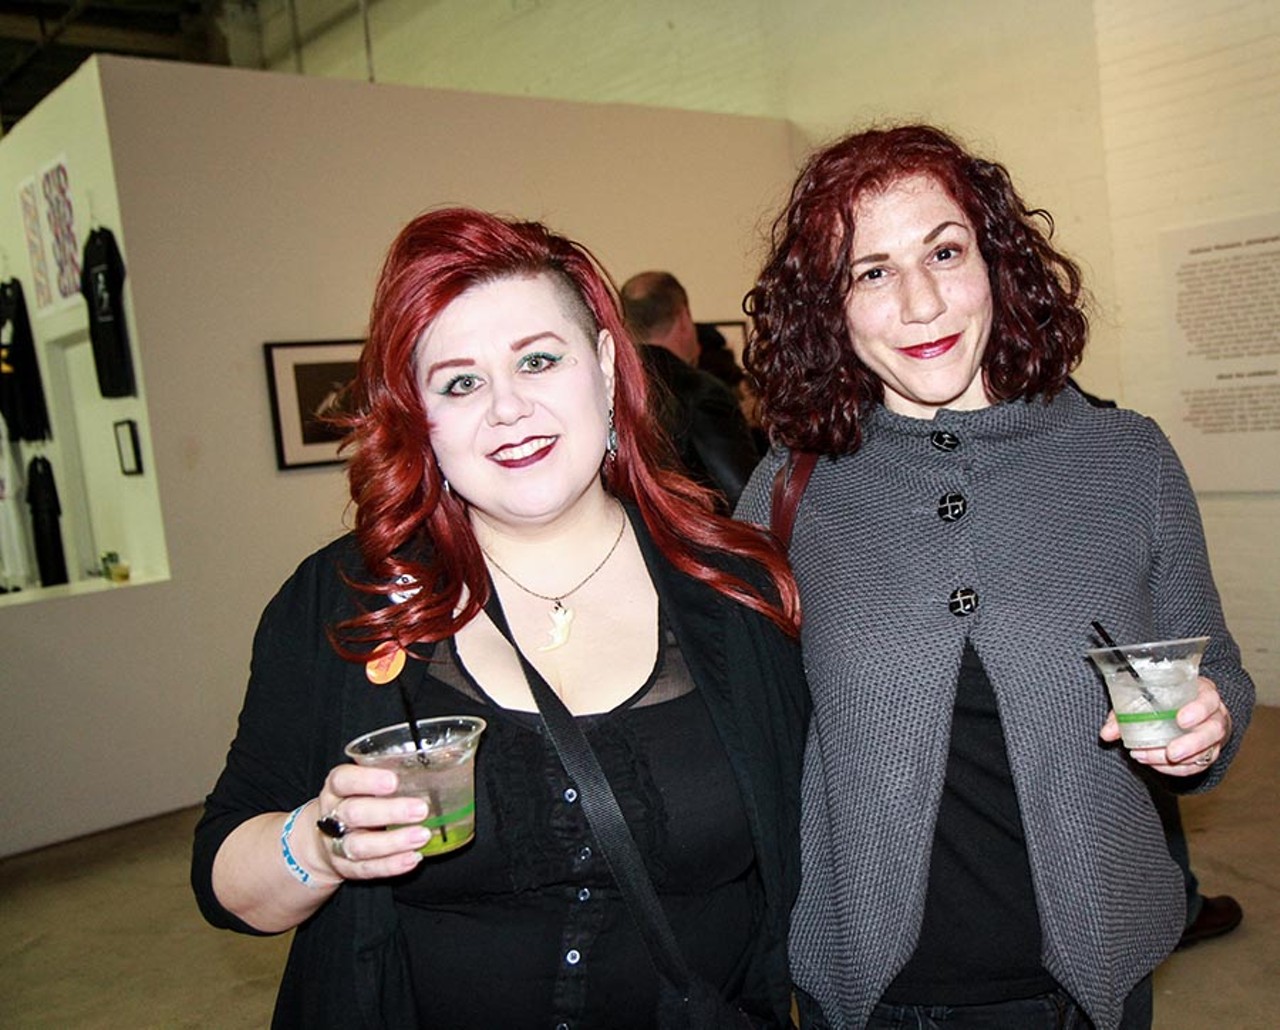 72 photos of everything we saw at The Art of Post Pop Depression opening